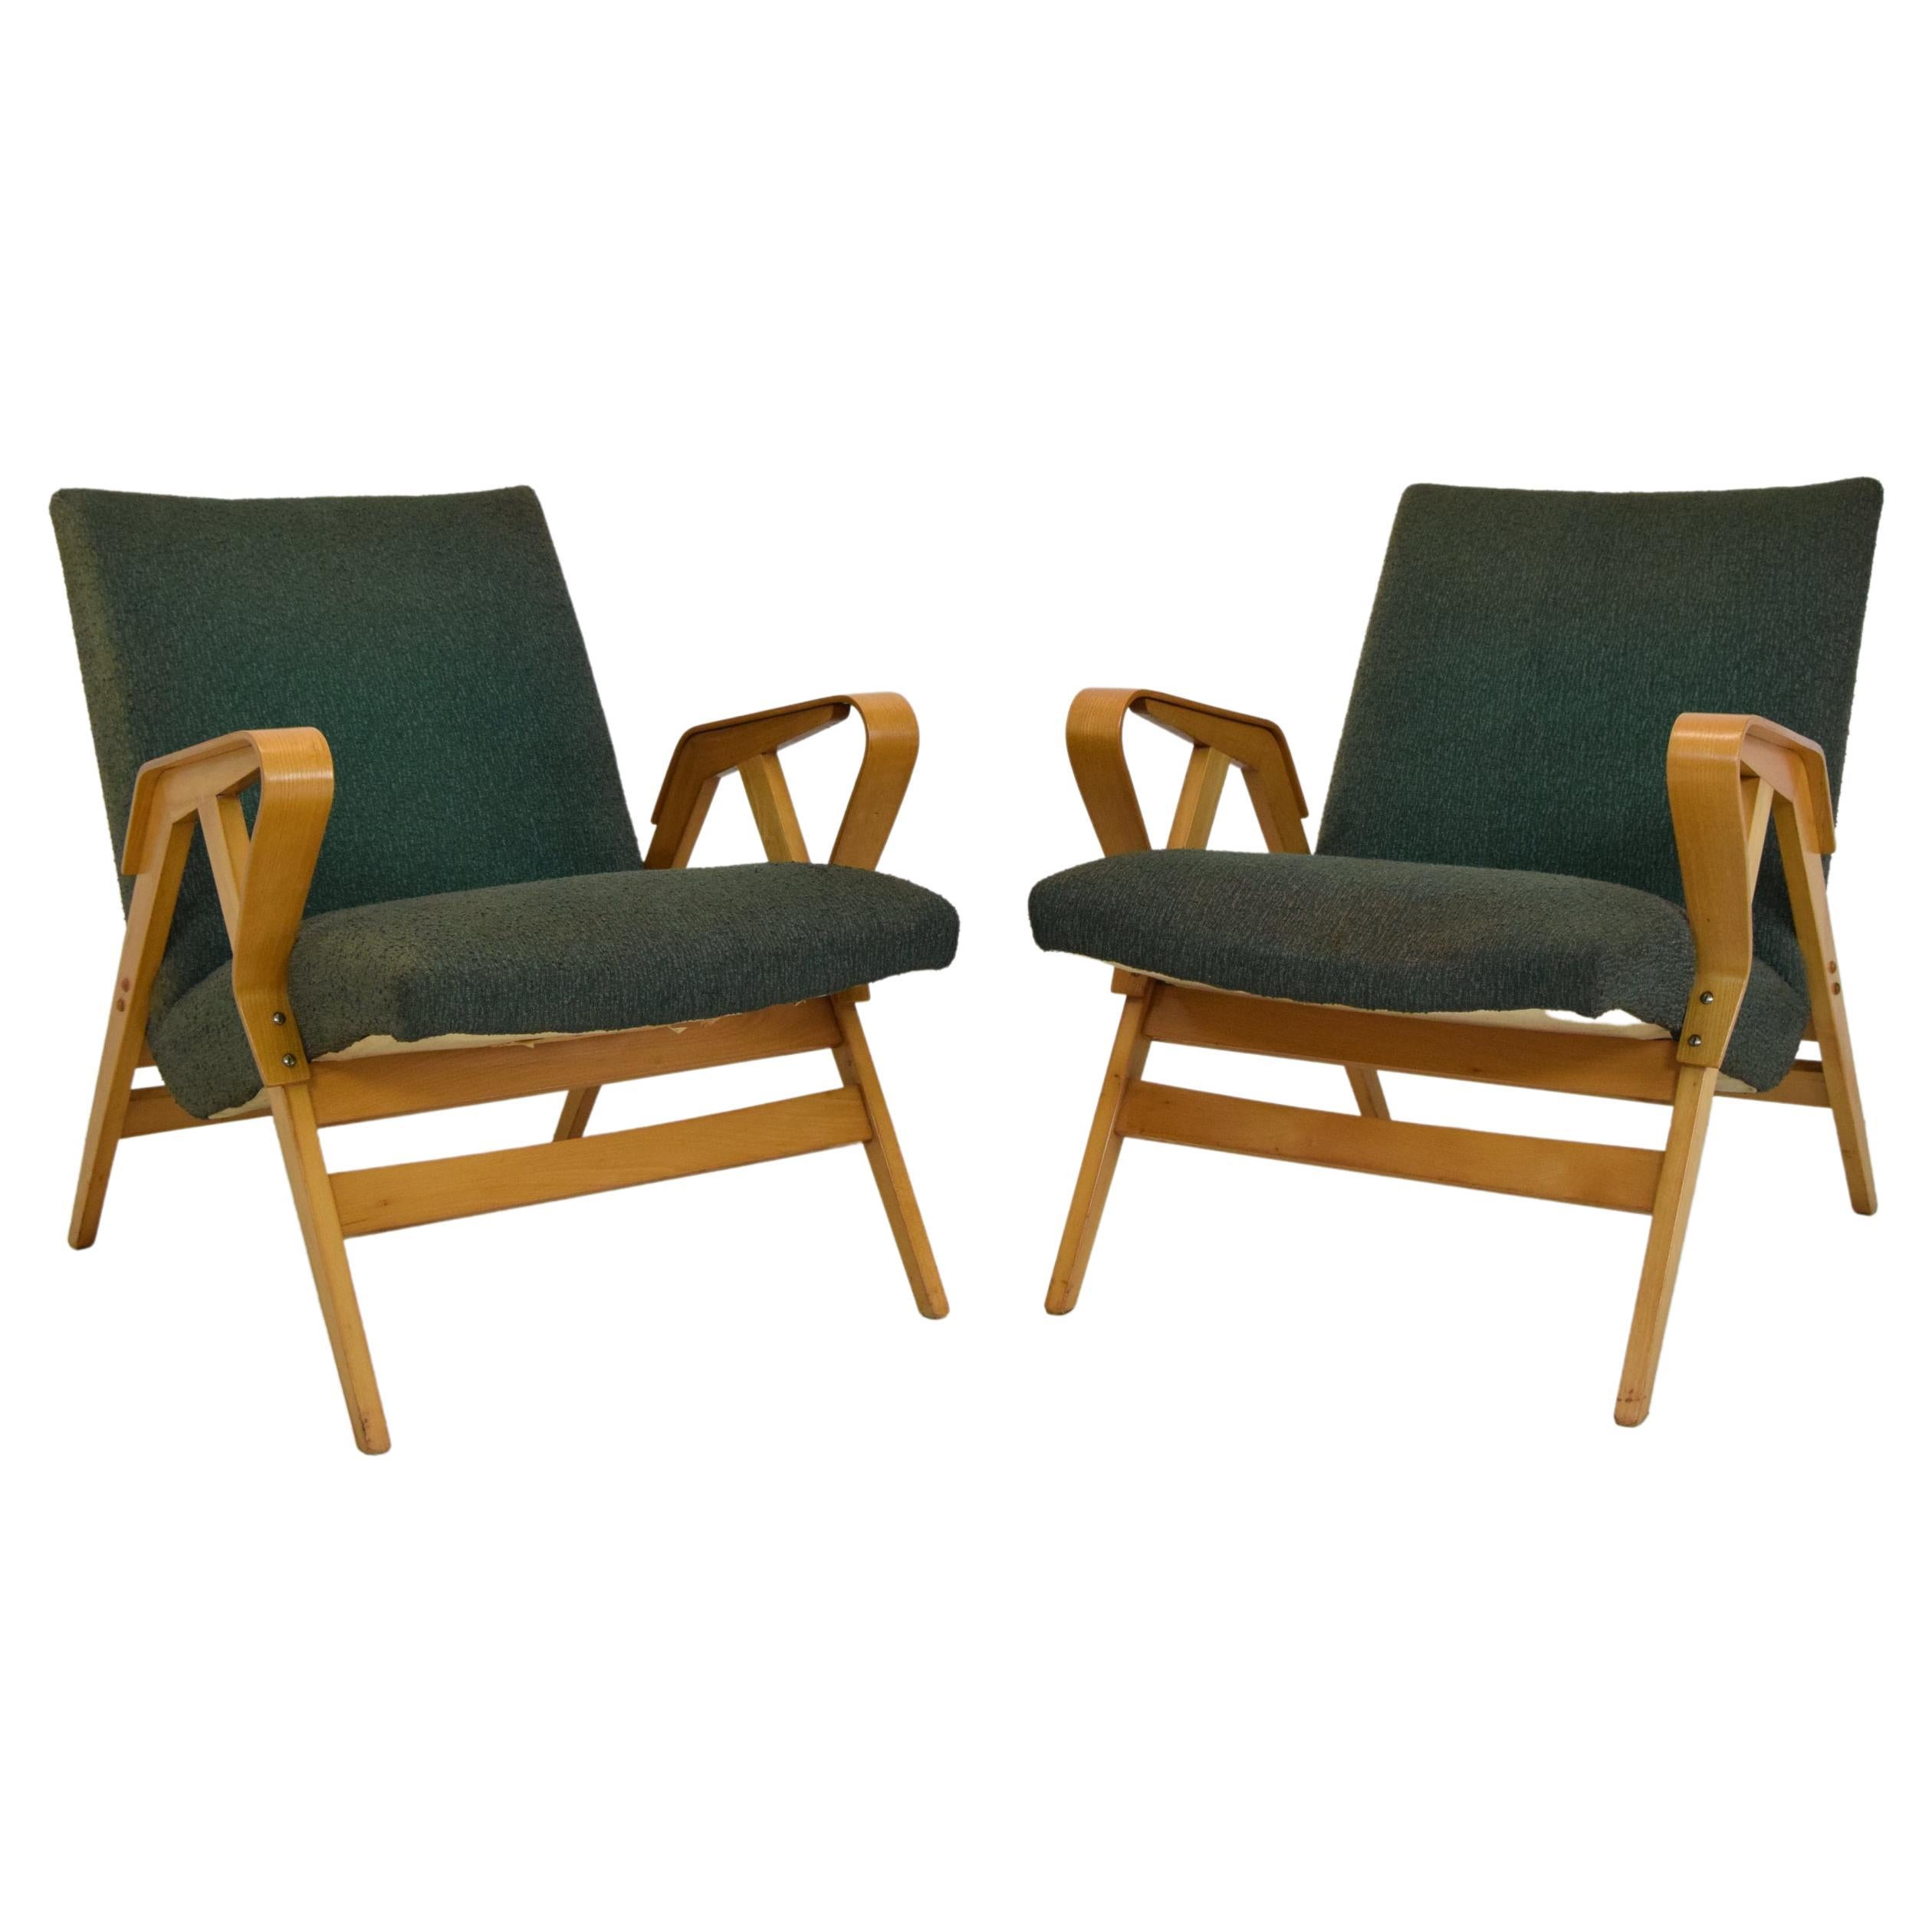 Pair of mid-century Bentwood Armchairs by Frantisek Jirak for Tatra, 1960's. For Sale